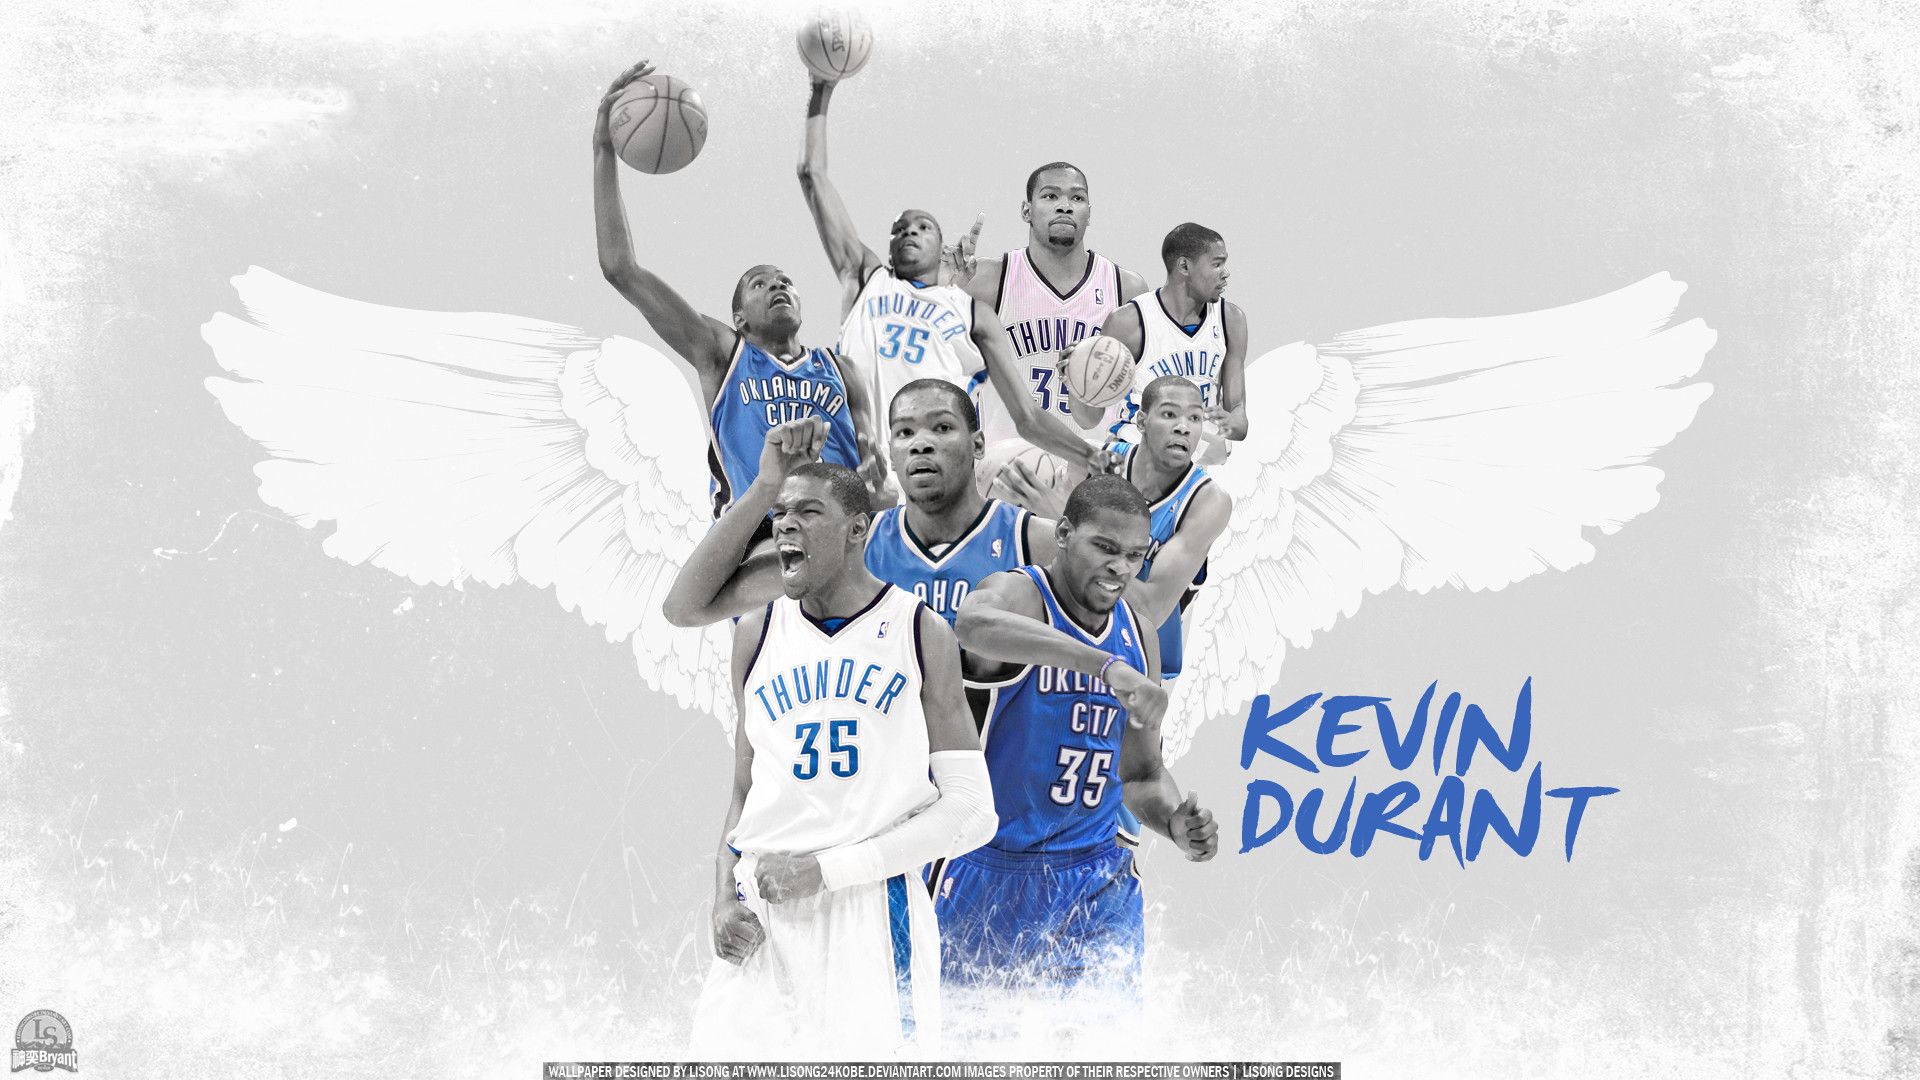 Golden state warriors wallpaper kevin durant - Photo #1535 - PNG